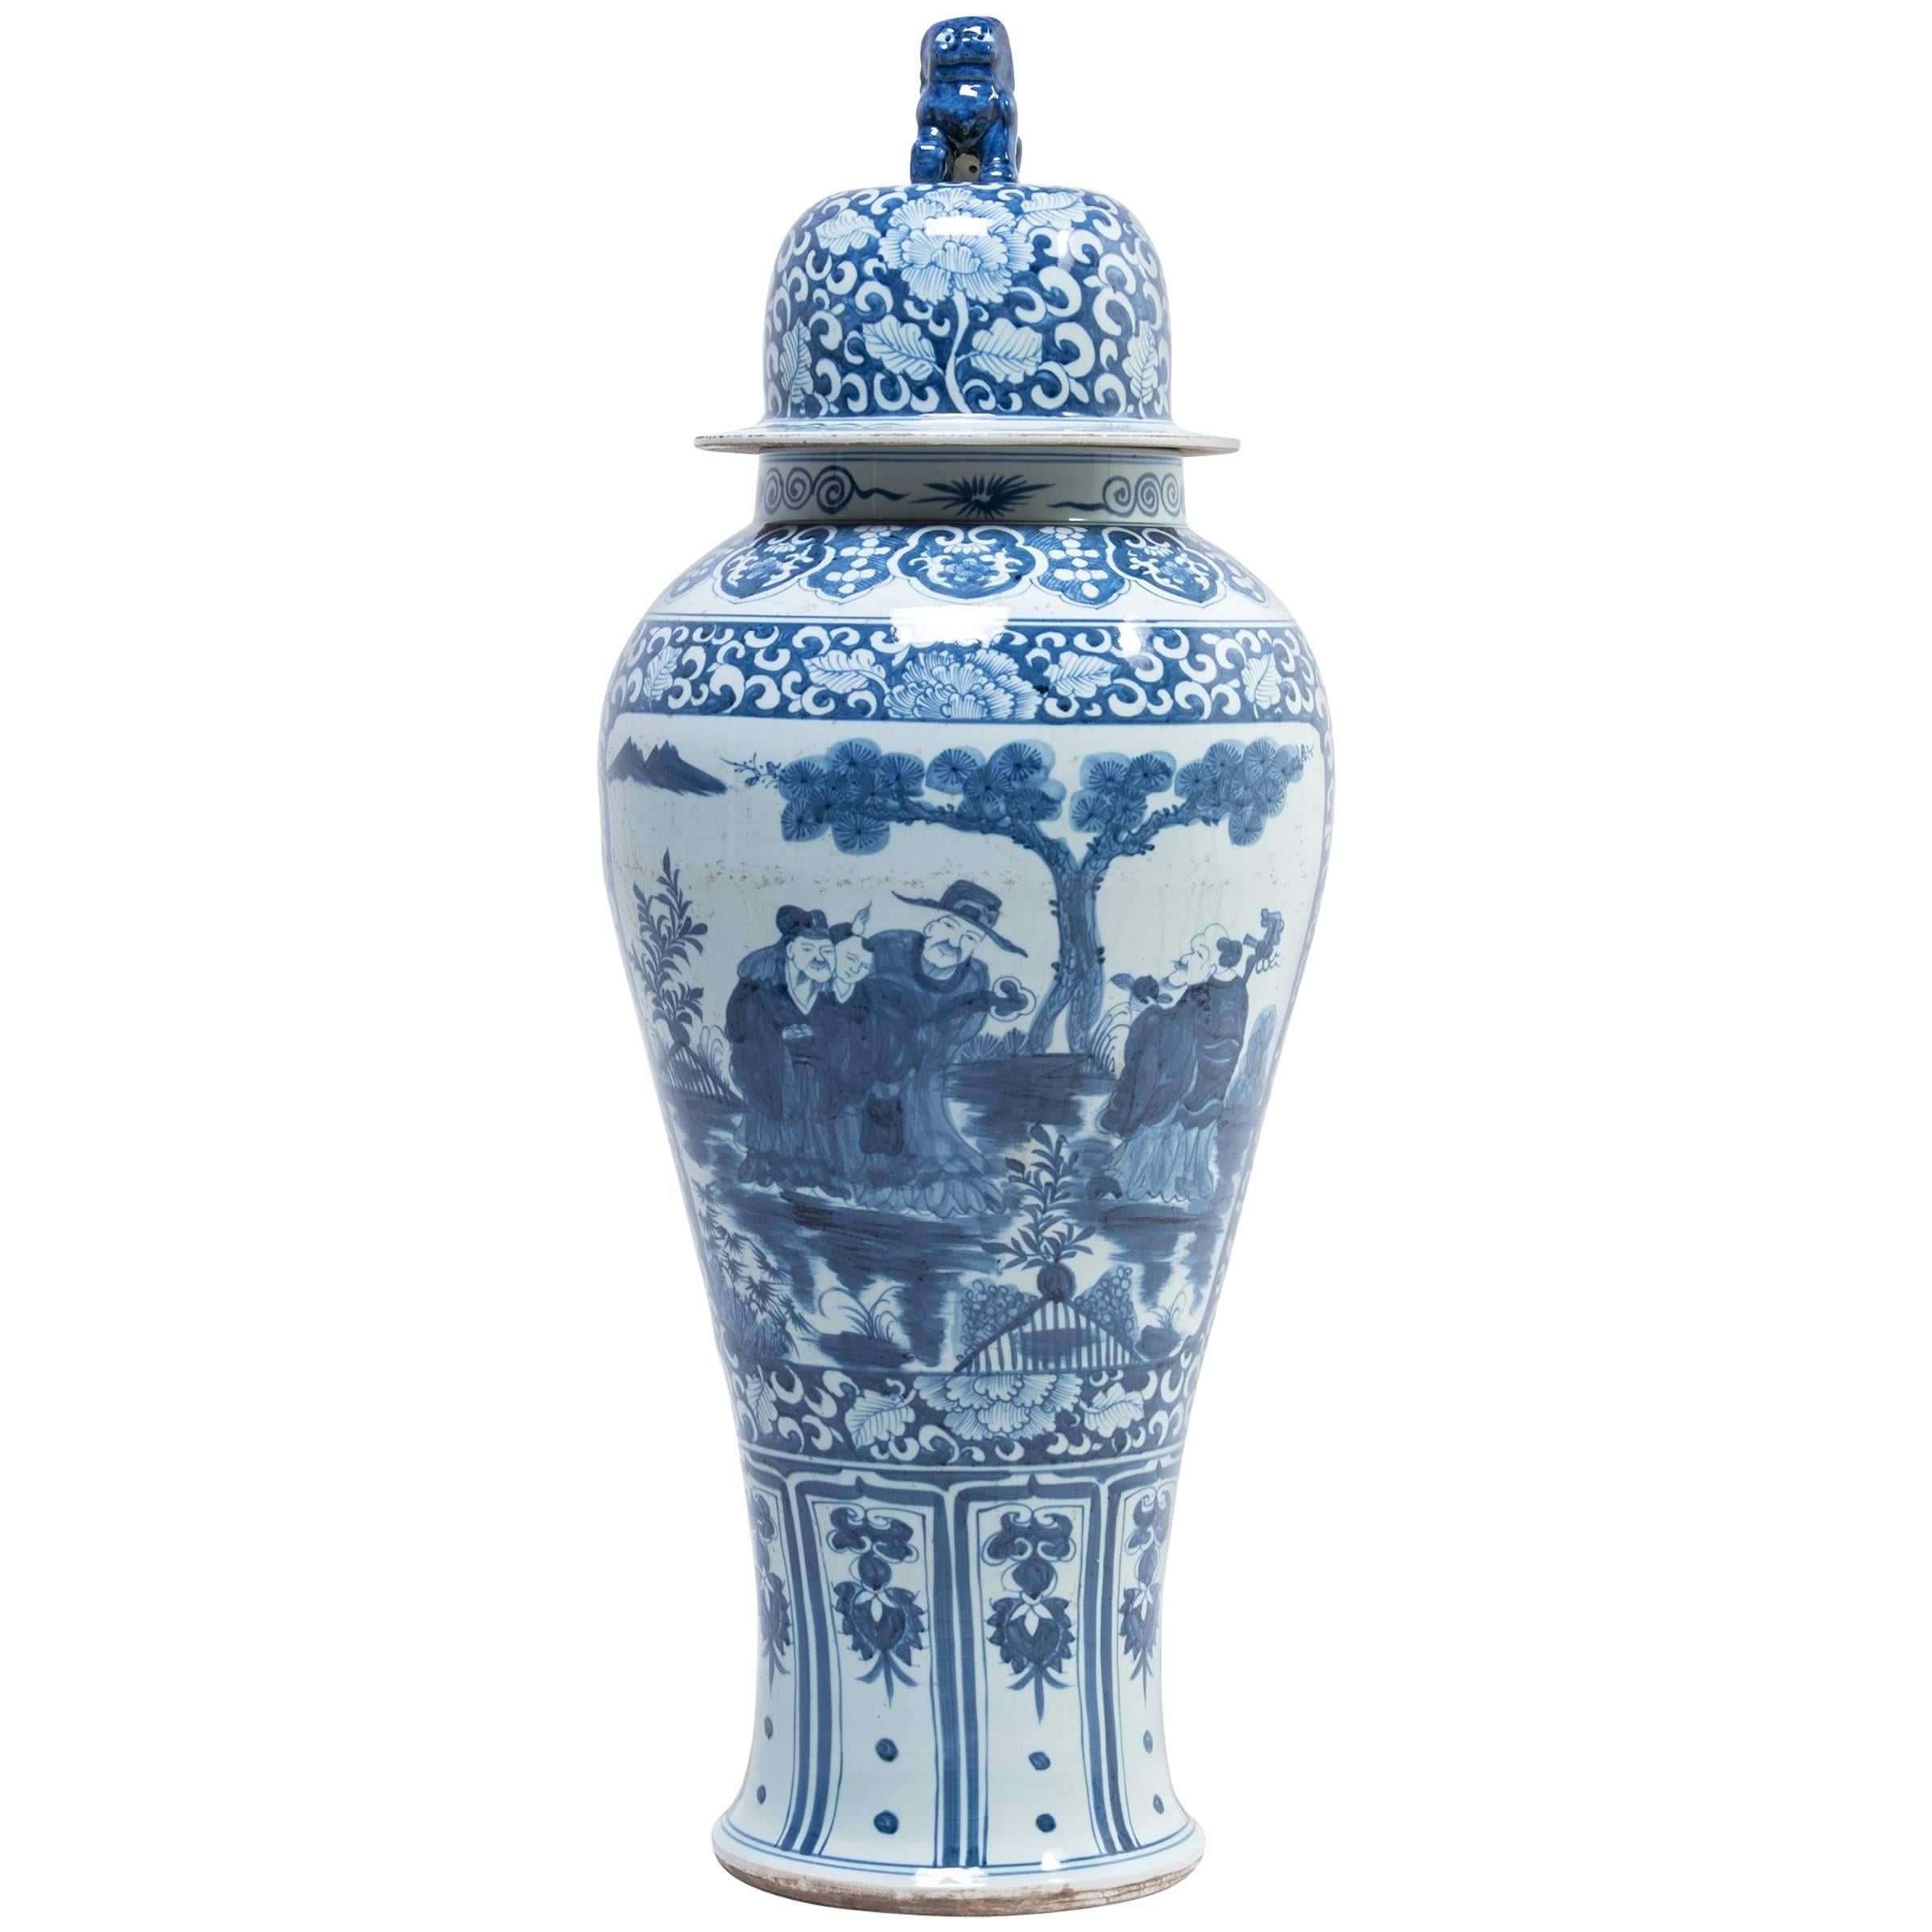 Blue and White Ginger Jar with Shizi and Landscape Portraits